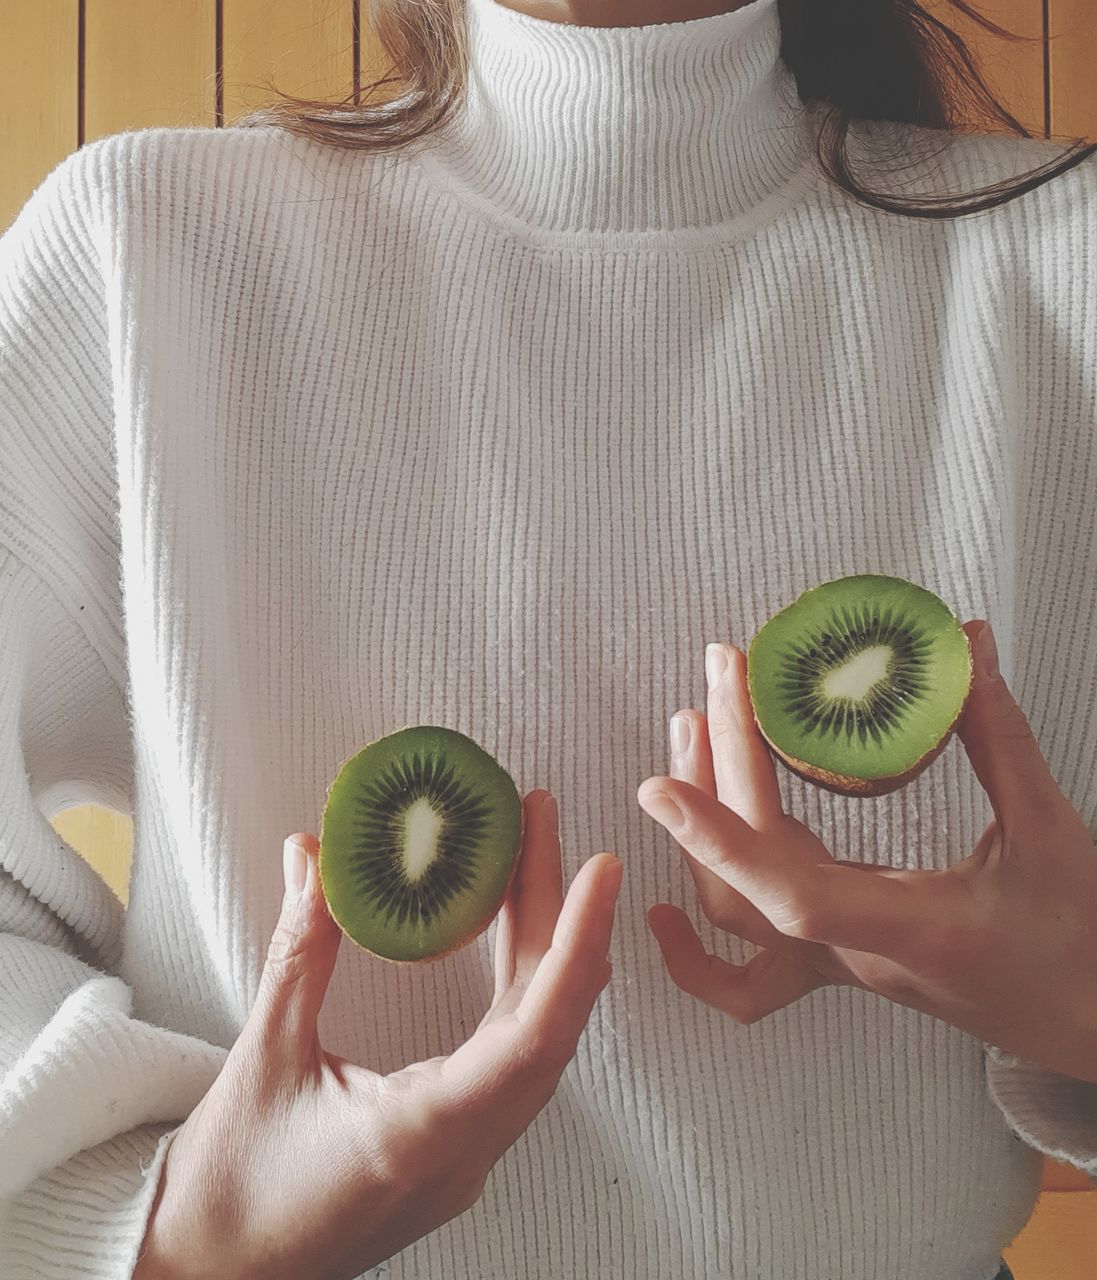 healthy eating, food and drink, fruit, food, human hand, hand, women, wellbeing, holding, human body part, indoors, lifestyles, freshness, real people, kiwi, adult, one person, kiwi - fruit, healthy lifestyle, finger